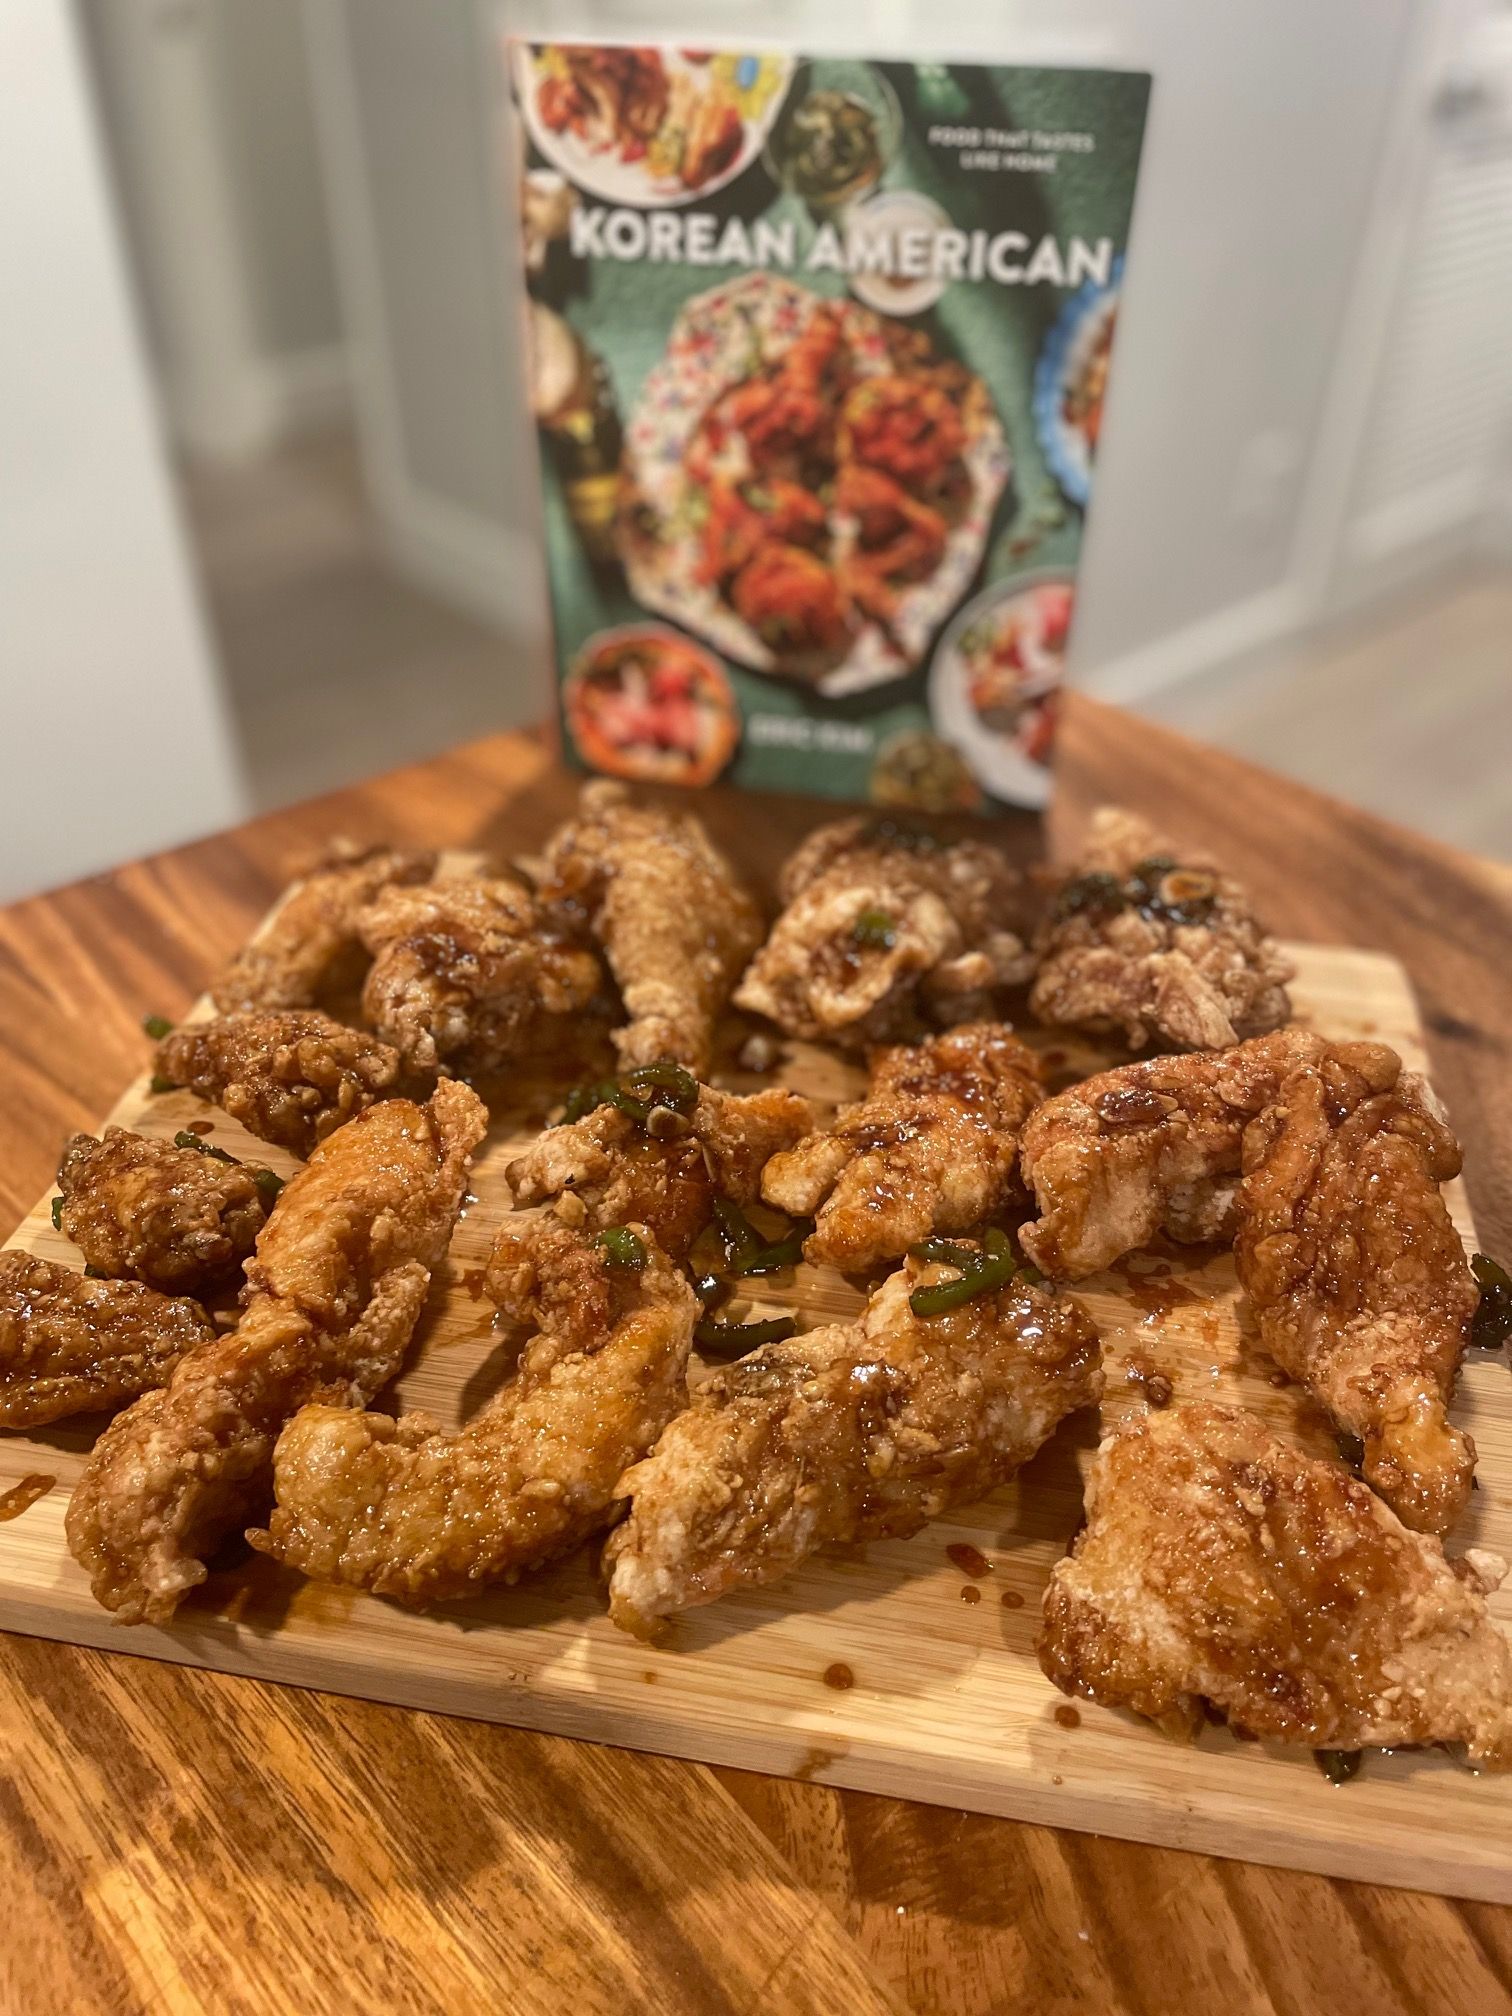 Various fried chicken pieces on a wooden cutting board in front of the cookbook Korean American